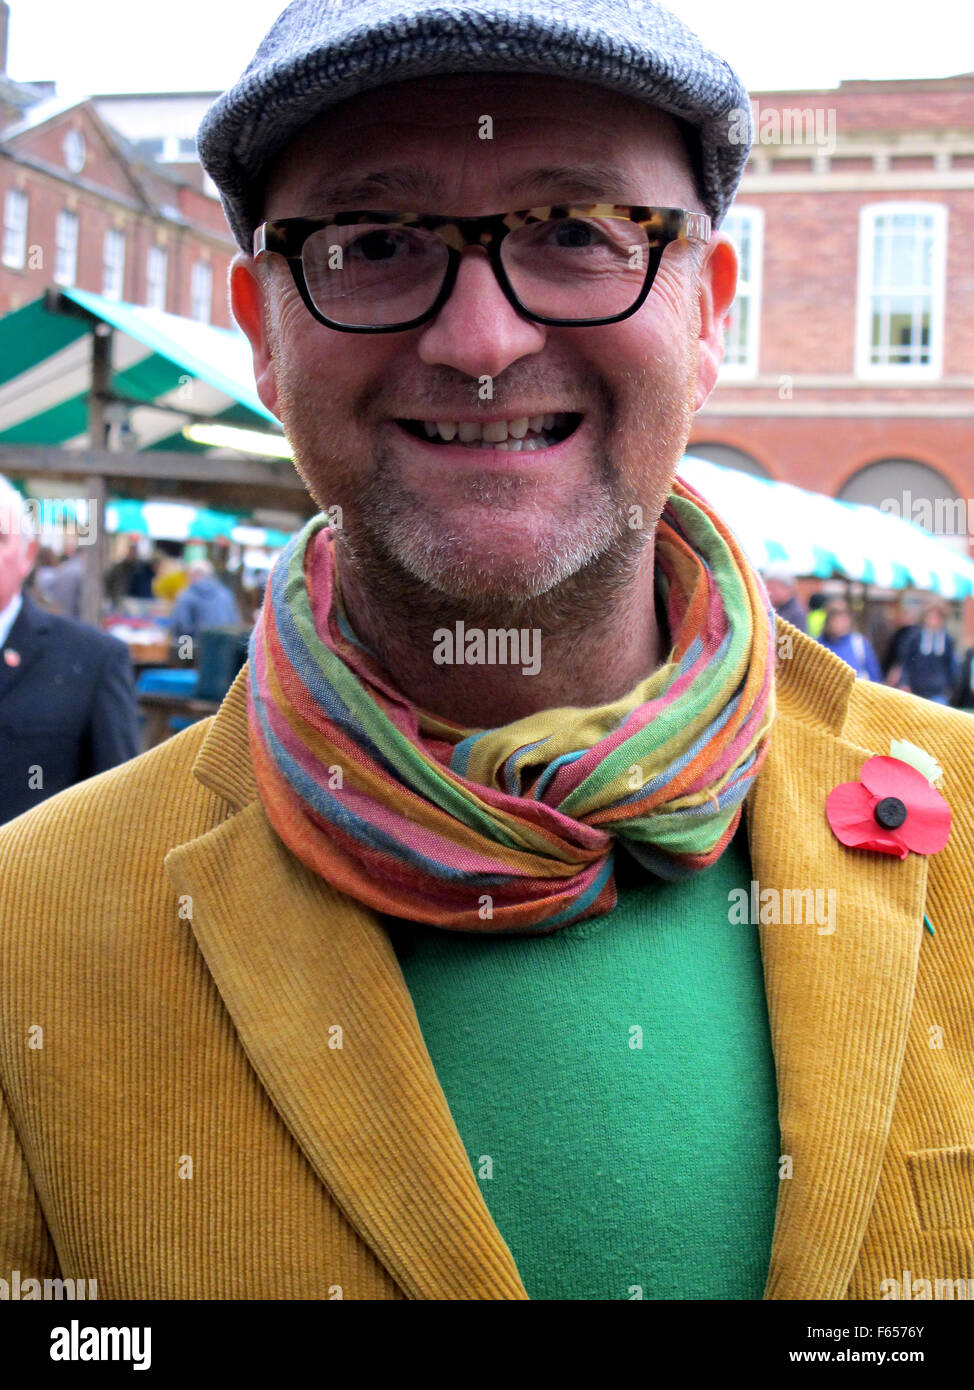 CHESTERFIELD, DERBYSHIRE, UK. OCTOBER 29, 2015. Portrait of antiques celebrity David Harper at an antiques market at Chesterfiel Stock Photo